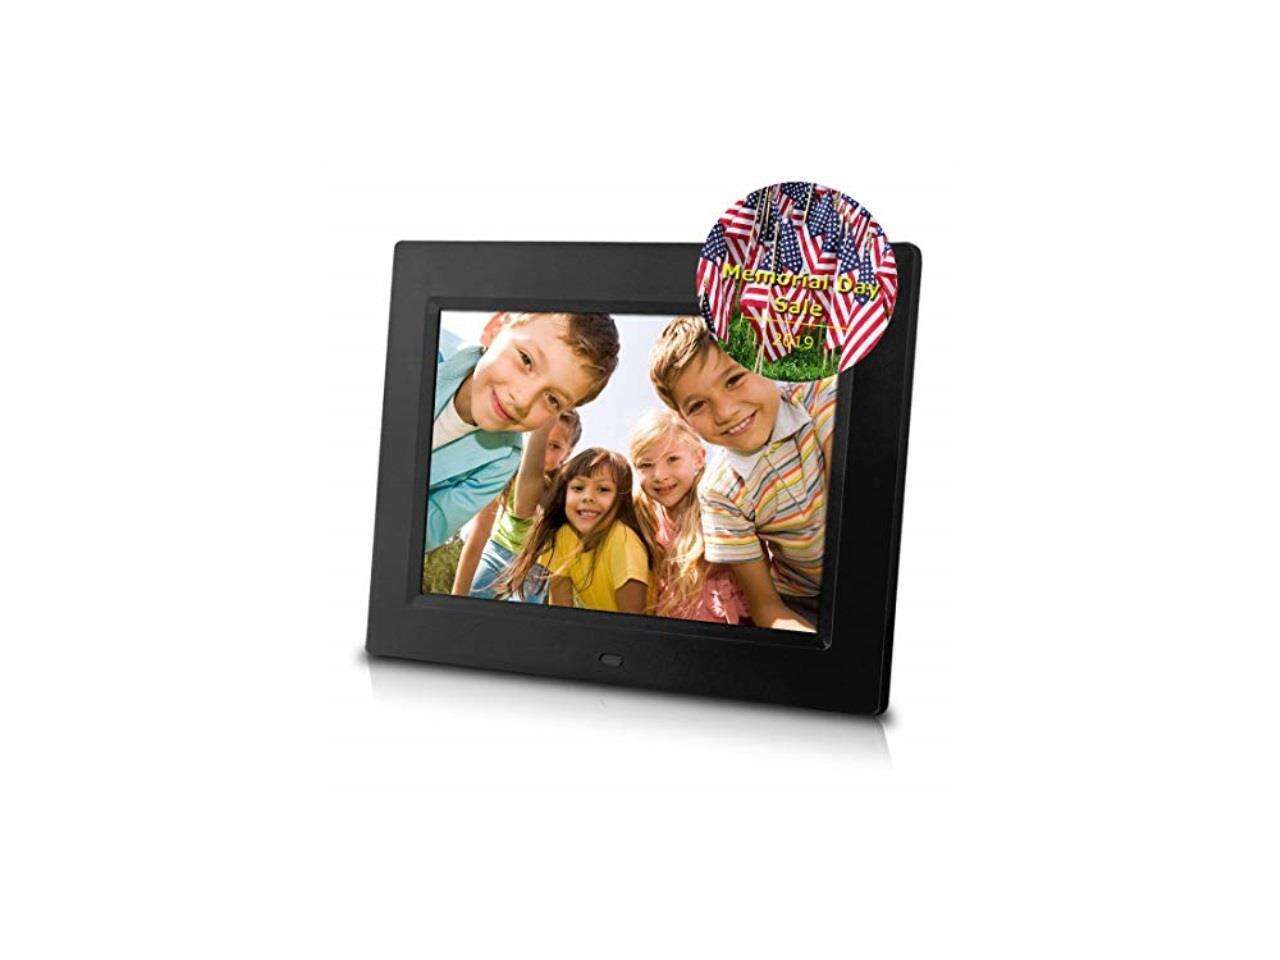 sungale cd802 8inch digital photo frame, multimedia player, 5 star product black